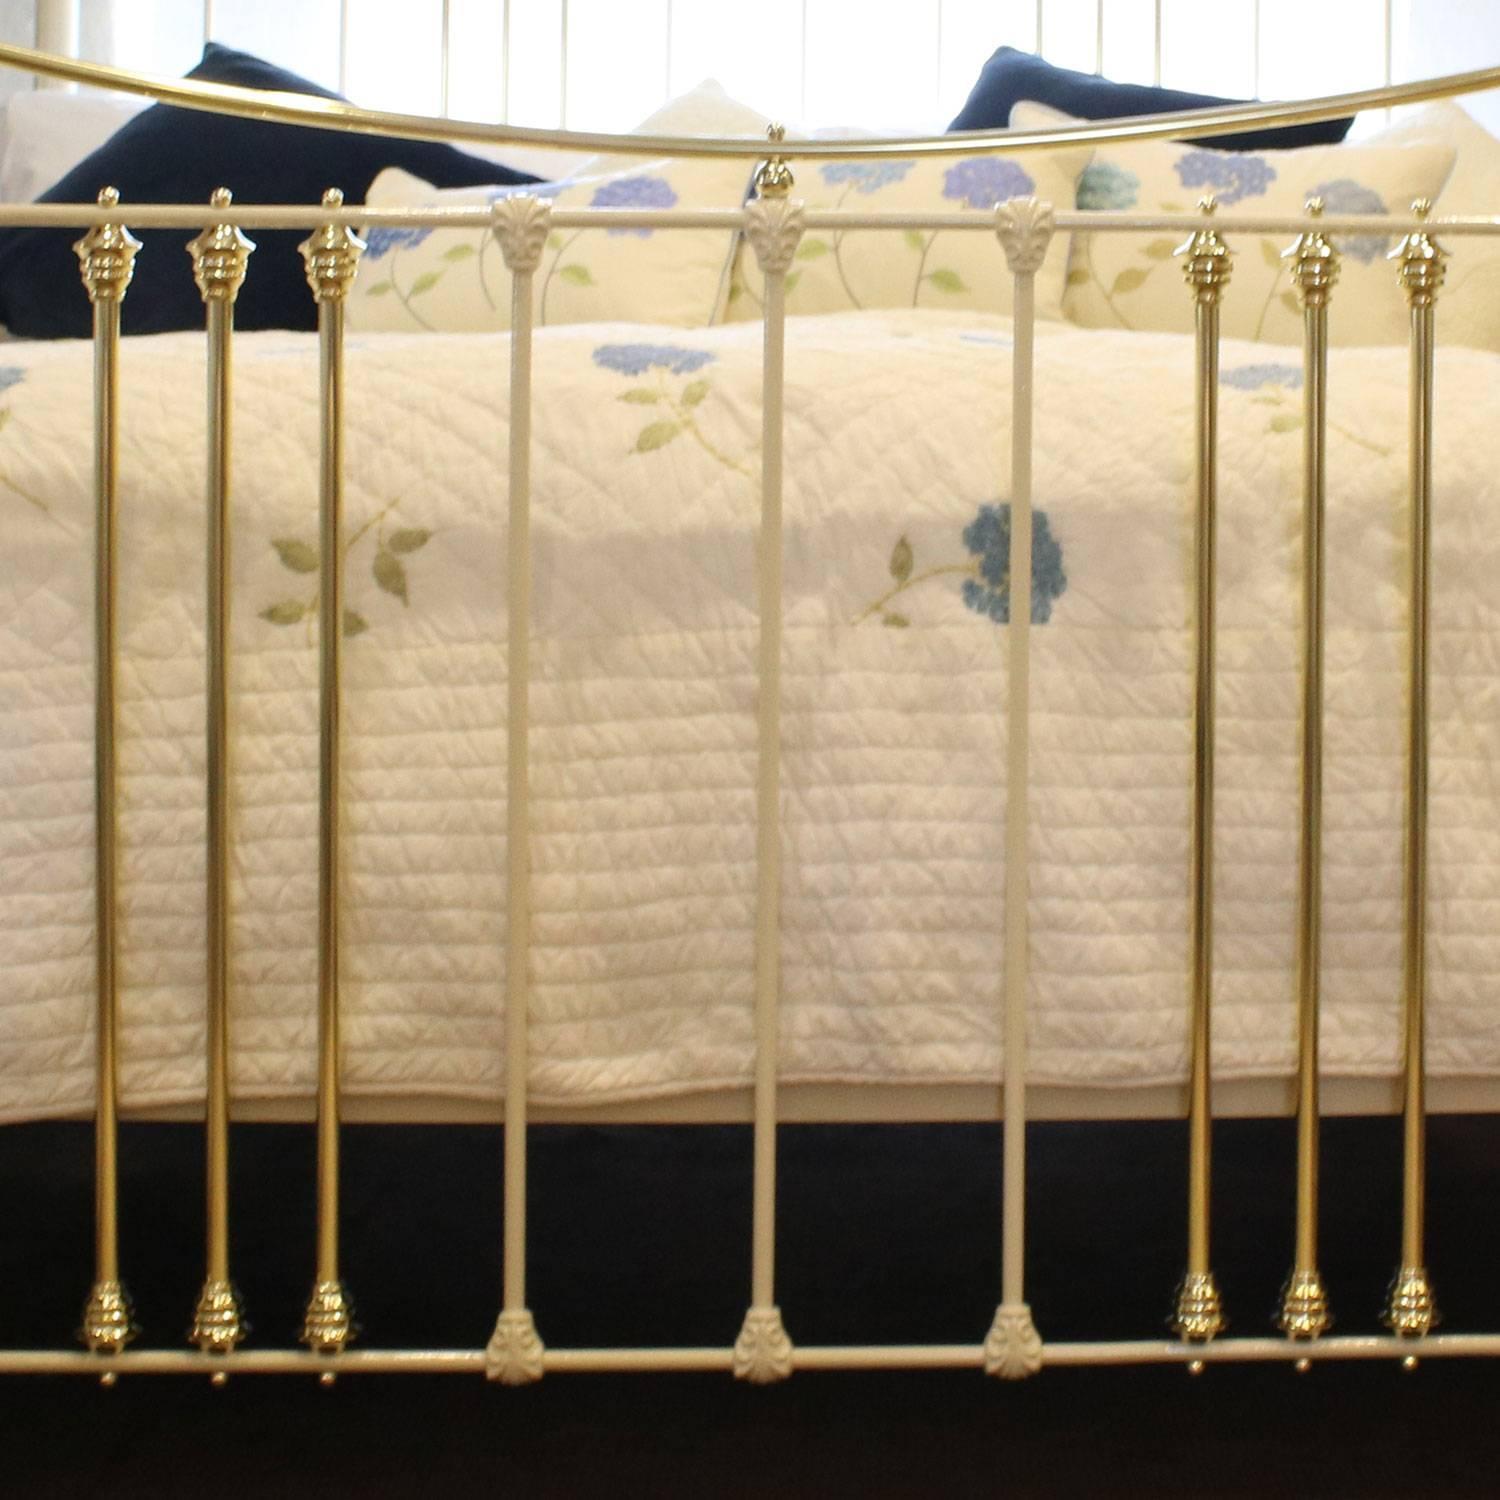 A brass and iron bed with a curved top rail and ornate castings, finished in soft cream,
This bed accepts a British Super king-size or Californian King (6ft, 72 inches or 180cm wide) base and mattress set.
The price is for the bed frame alone. The